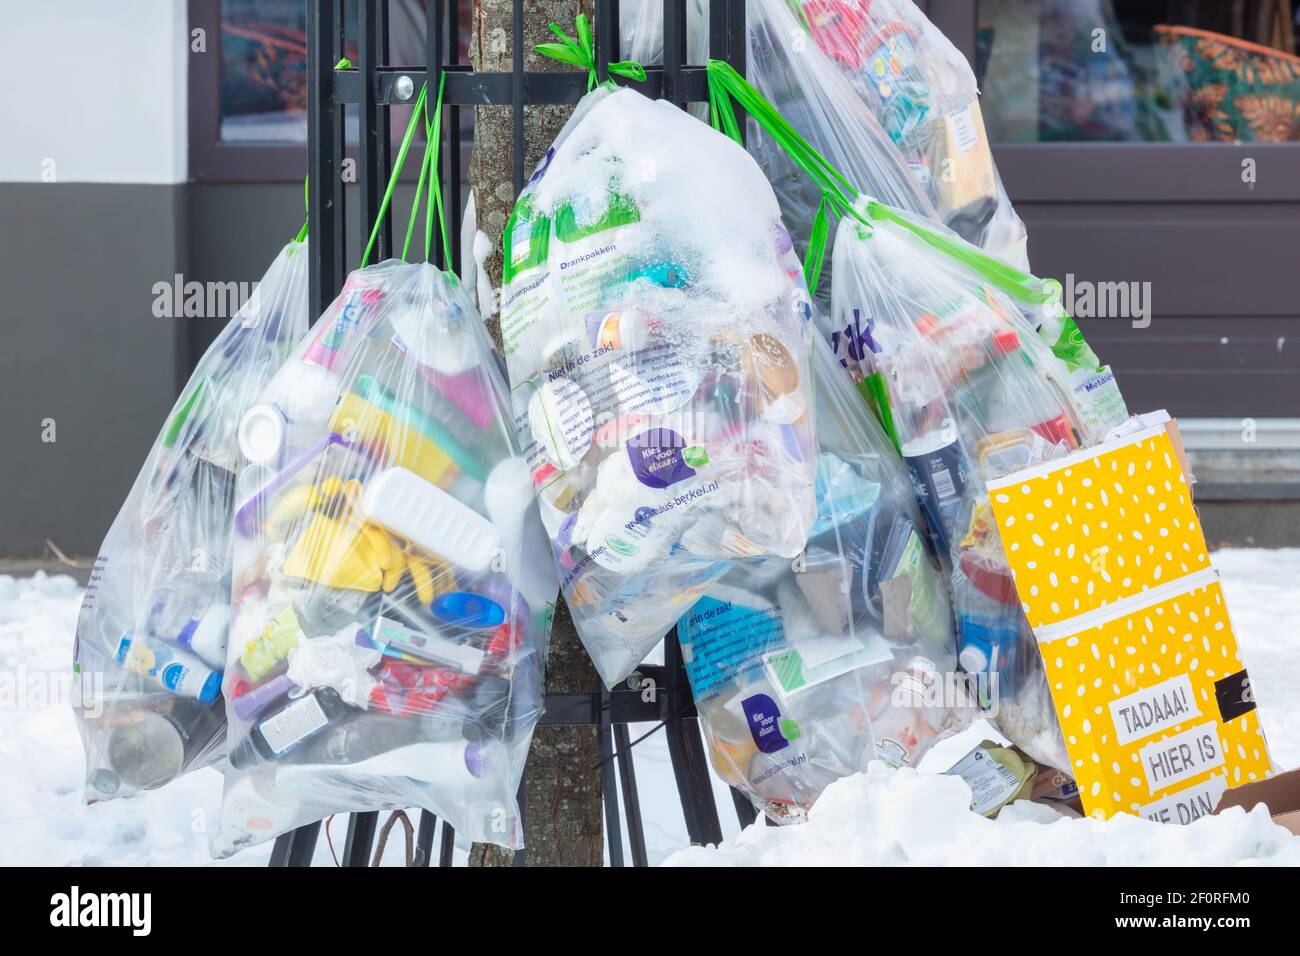 Zutphen, The Netherlands - February 2, 2021: Bags with plastic waste  waiting to be processed and collected in the historic city center of  Zutphen, The Stock Photo - Alamy